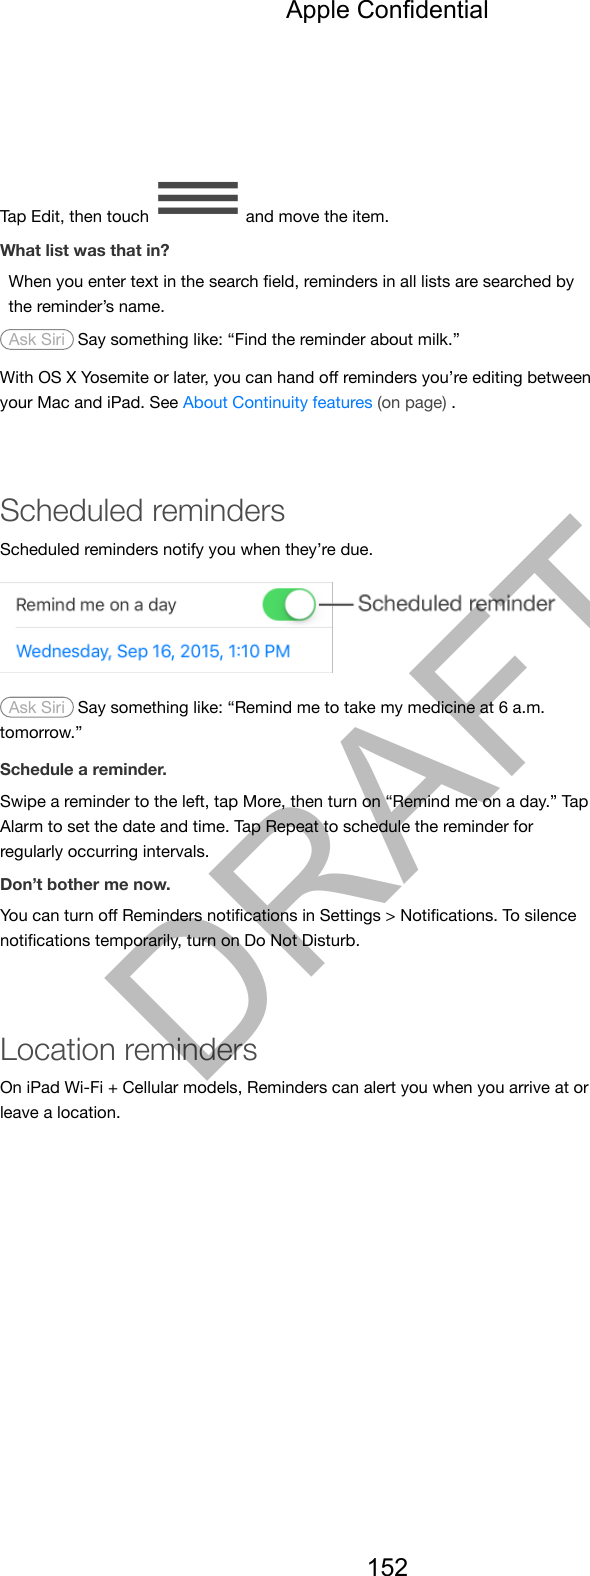 Tap Edit, then touch   and move the item.What list was that in?When you enter text in the search ﬁeld, reminders in all lists are searched bythe reminder’s name. Ask Siri  Say something like: “Find the reminder about milk.”With OS X Yosemite or later, you can hand oﬀ reminders you’re editing betweenyour Mac and iPad. See About Continuity features (on page) .Scheduled remindersScheduled reminders notify you when they’re due. Ask Siri  Say something like: “Remind me to take my medicine at 6 a.m.tomorrow.”Schedule a reminder.Swipe a reminder to the left, tap More, then turn on “Remind me on a day.” TapAlarm to set the date and time. Tap Repeat to schedule the reminder forregularly occurring intervals.Don’t bother me now.You can turn oﬀ Reminders notiﬁcations in Settings &gt; Notiﬁcations. To silencenotiﬁcations temporarily, turn on Do Not Disturb.Location remindersOn iPad Wi-Fi + Cellular models, Reminders can alert you when you arrive at orleave a location.Apple Confidential152DRAFT